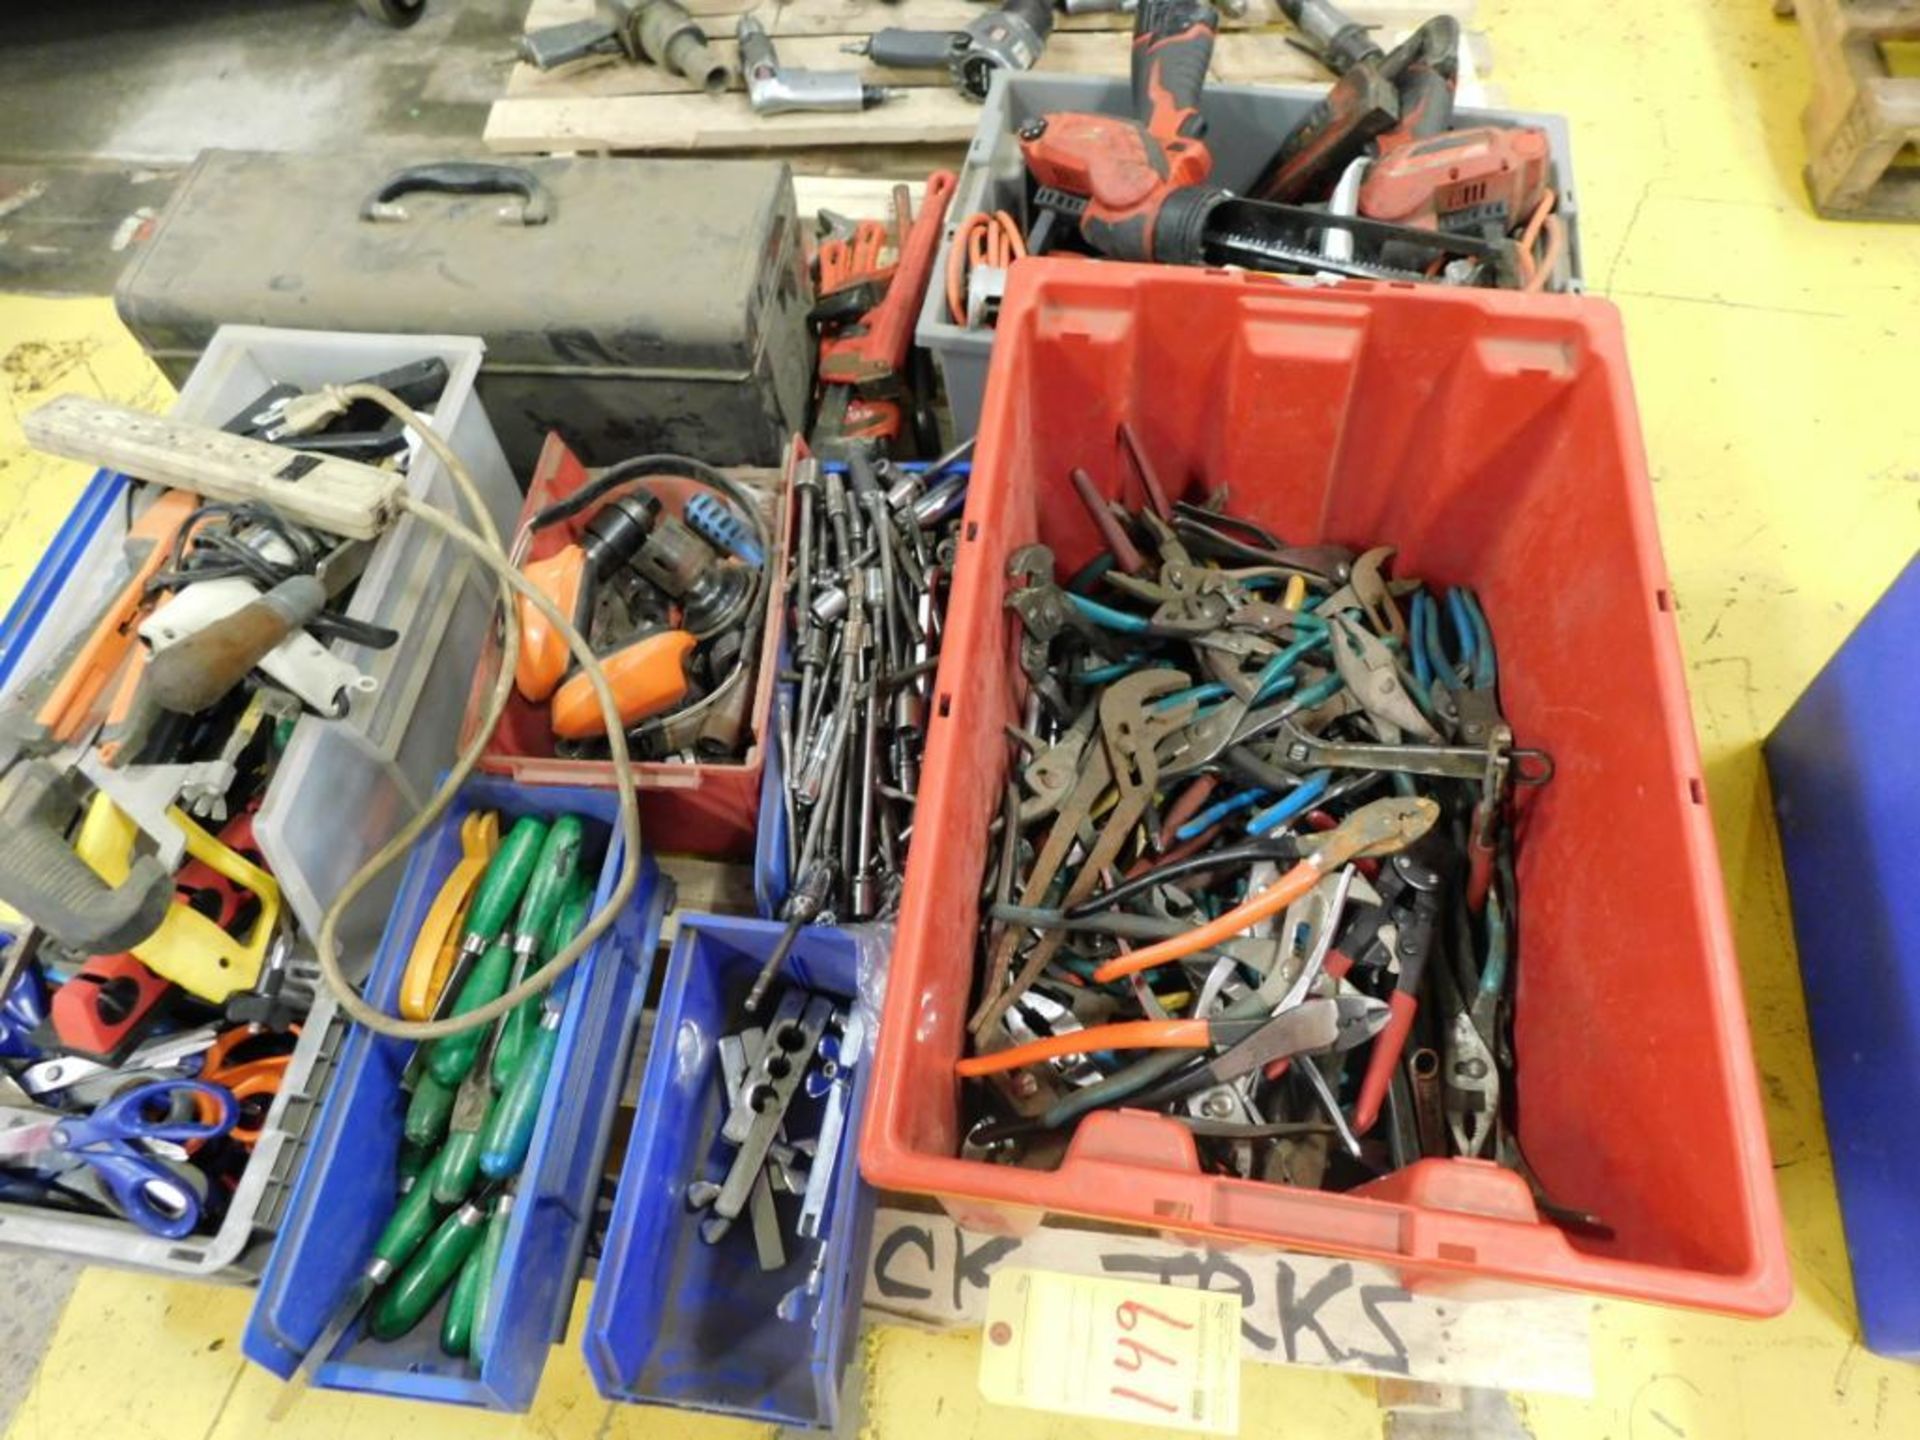 LOT CONSISTING OF: hand tools, pipe wrenches, cordless caulk guns, assorted (one pallet)